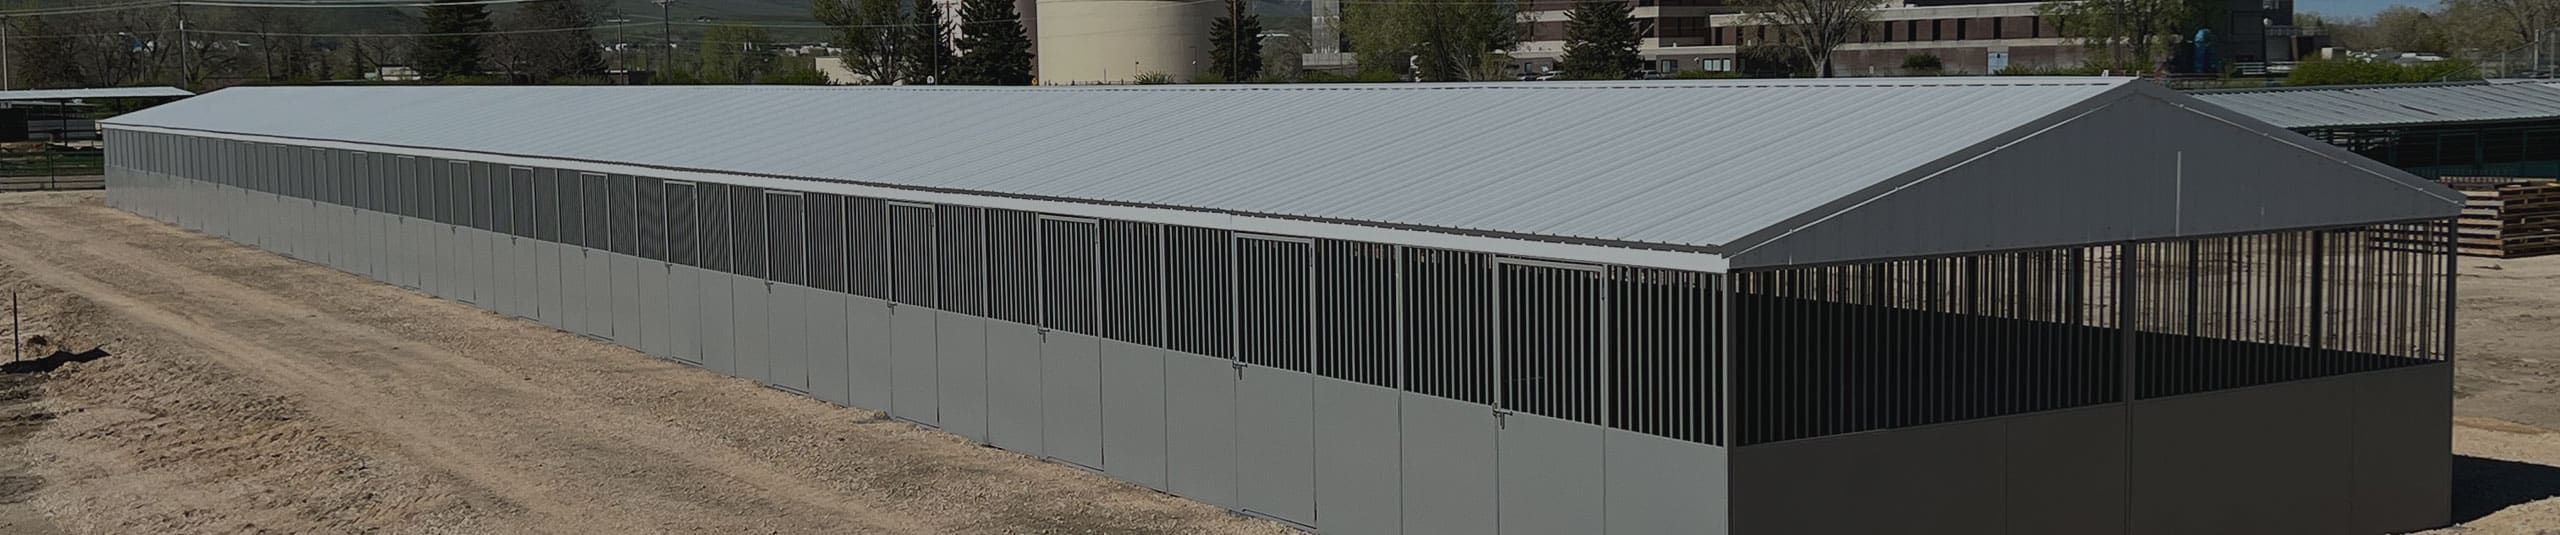 Commercial large weld-up metal building designed and built by Port A Stall